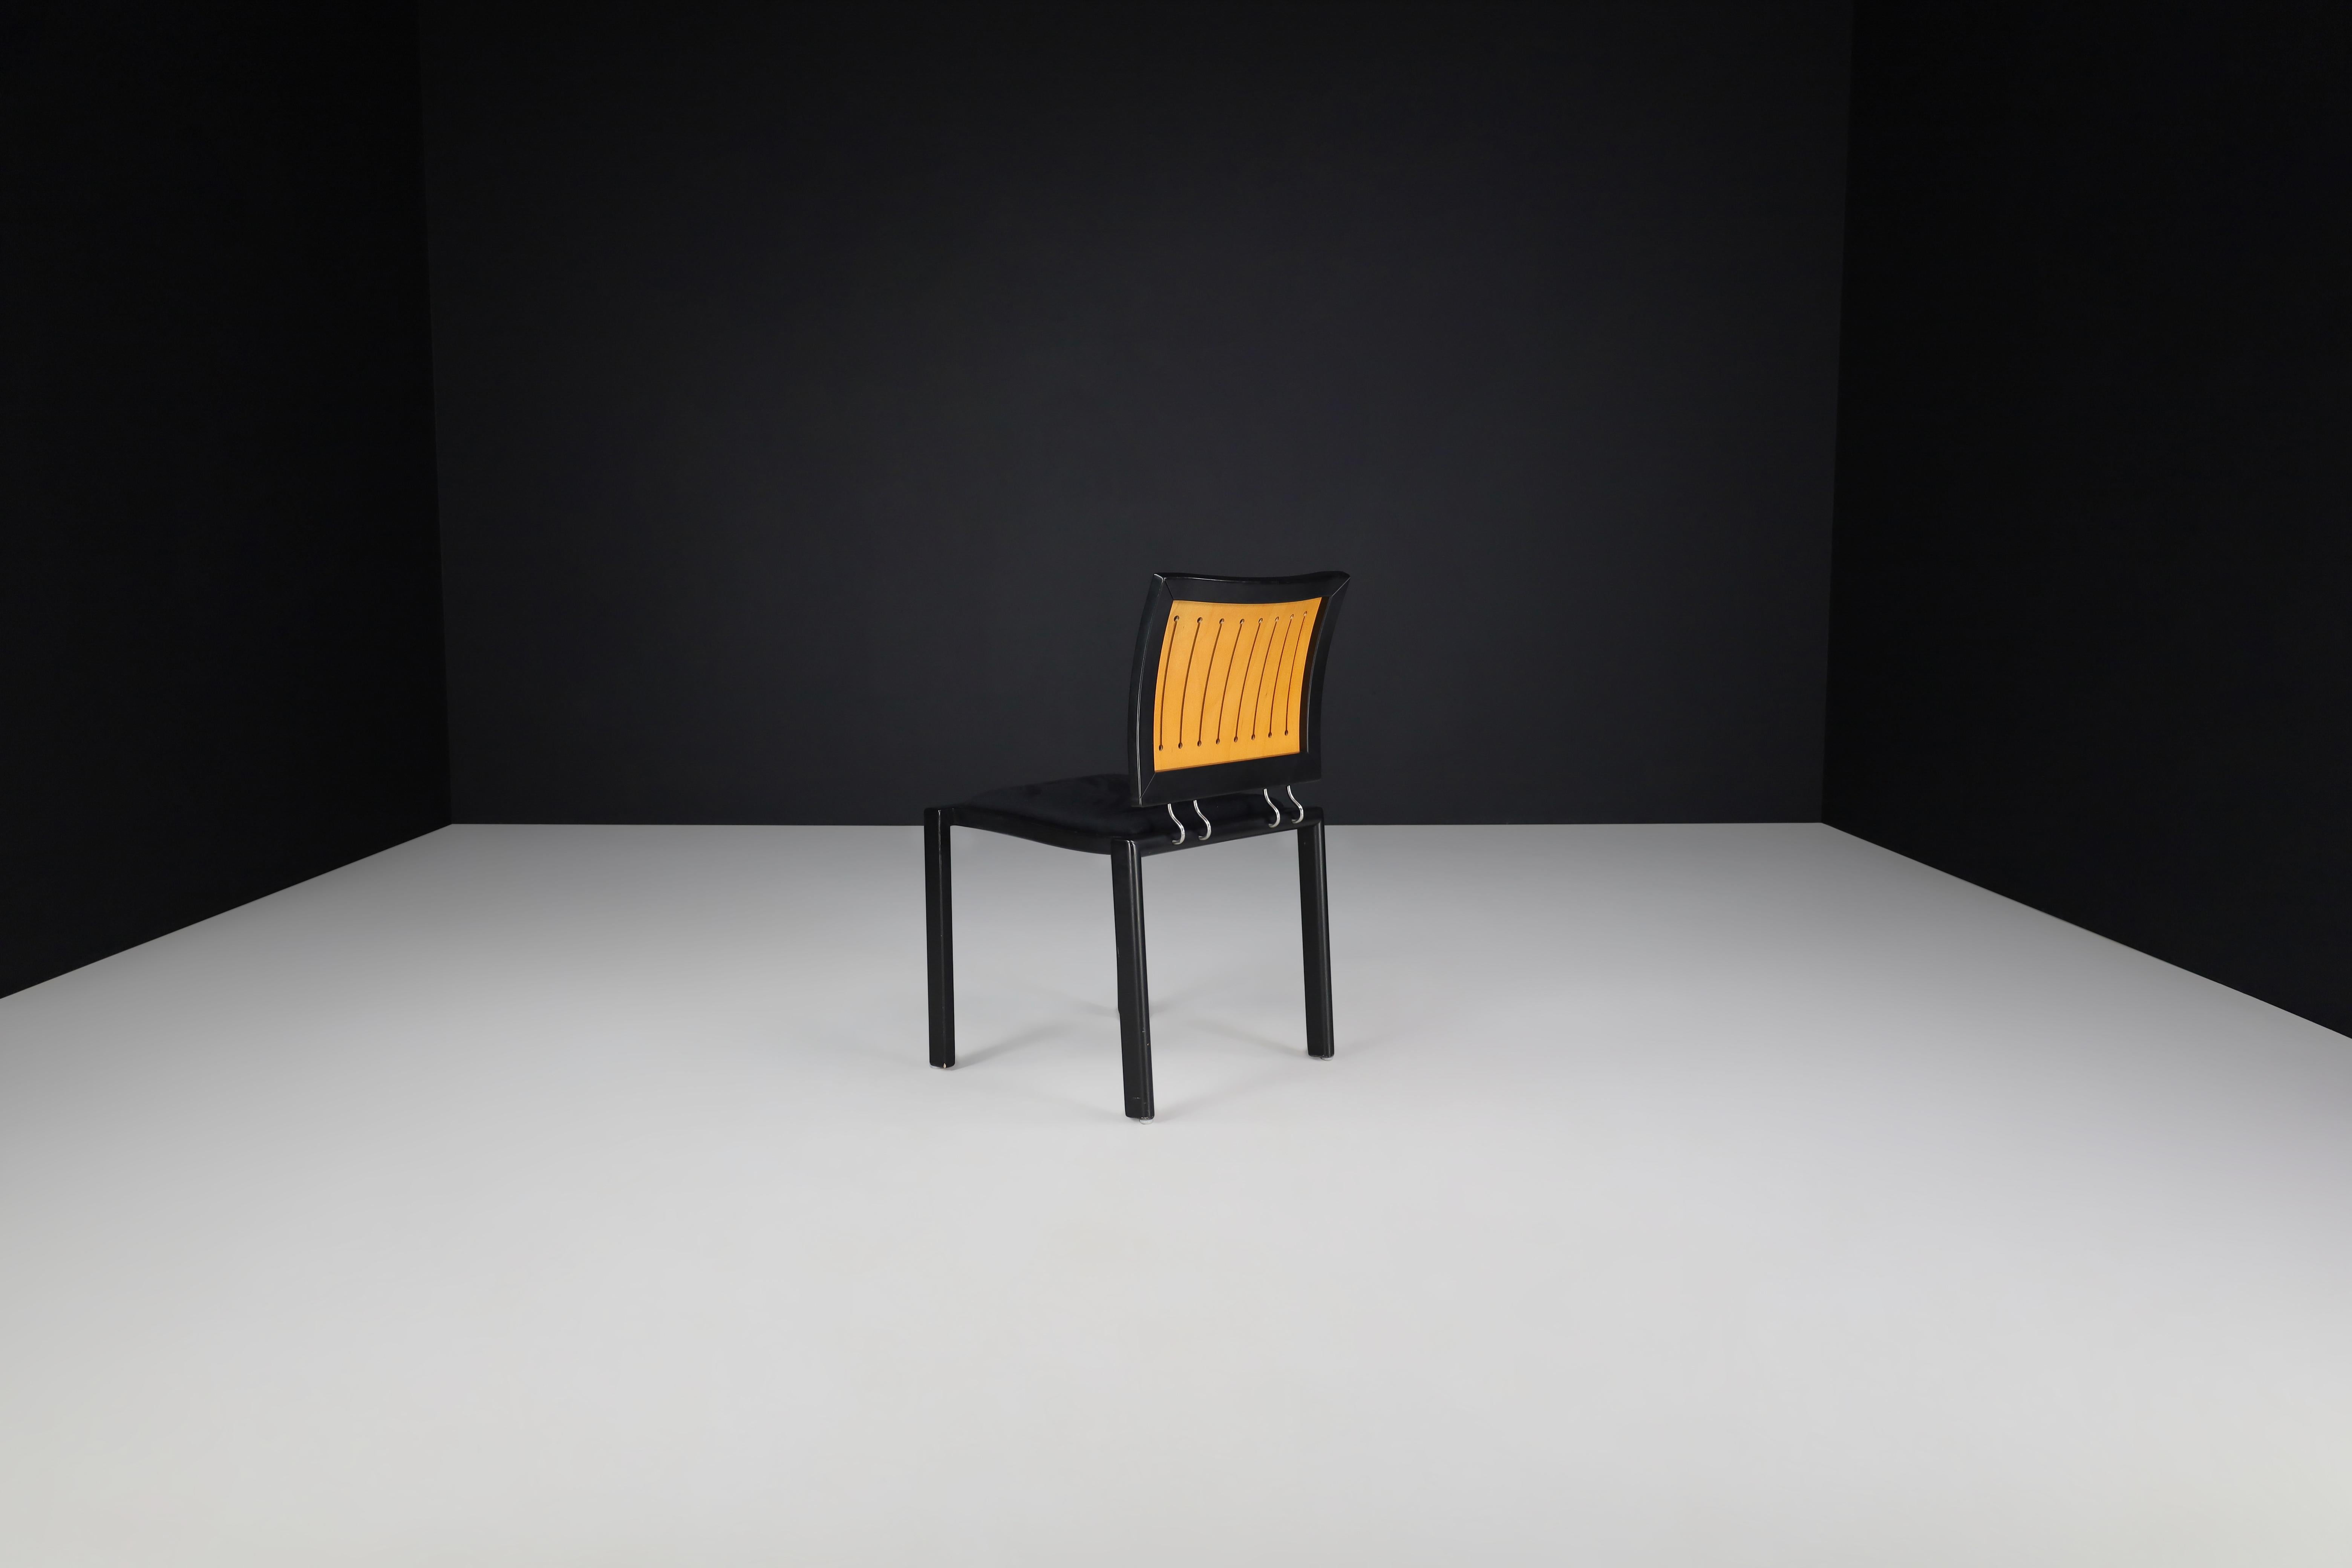 Quadro Chairs by Bruno Rey & Charles Polin for Dietiker, Switzerland, 1980s For Sale 3